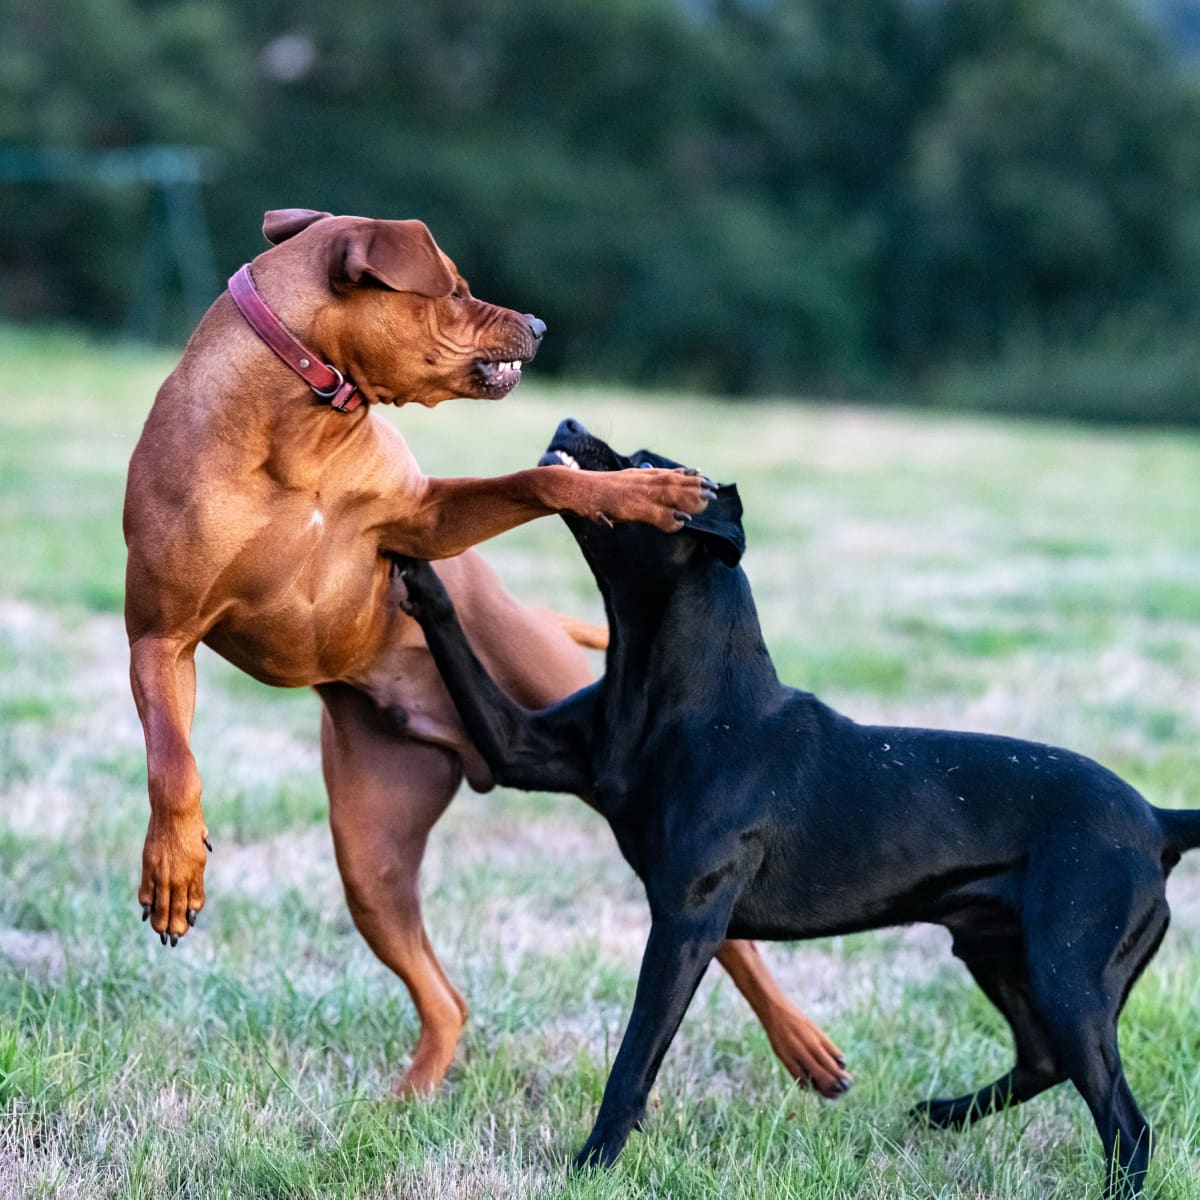 Why Is My Dog Aggressive To Other Dogs? - Pethelpful